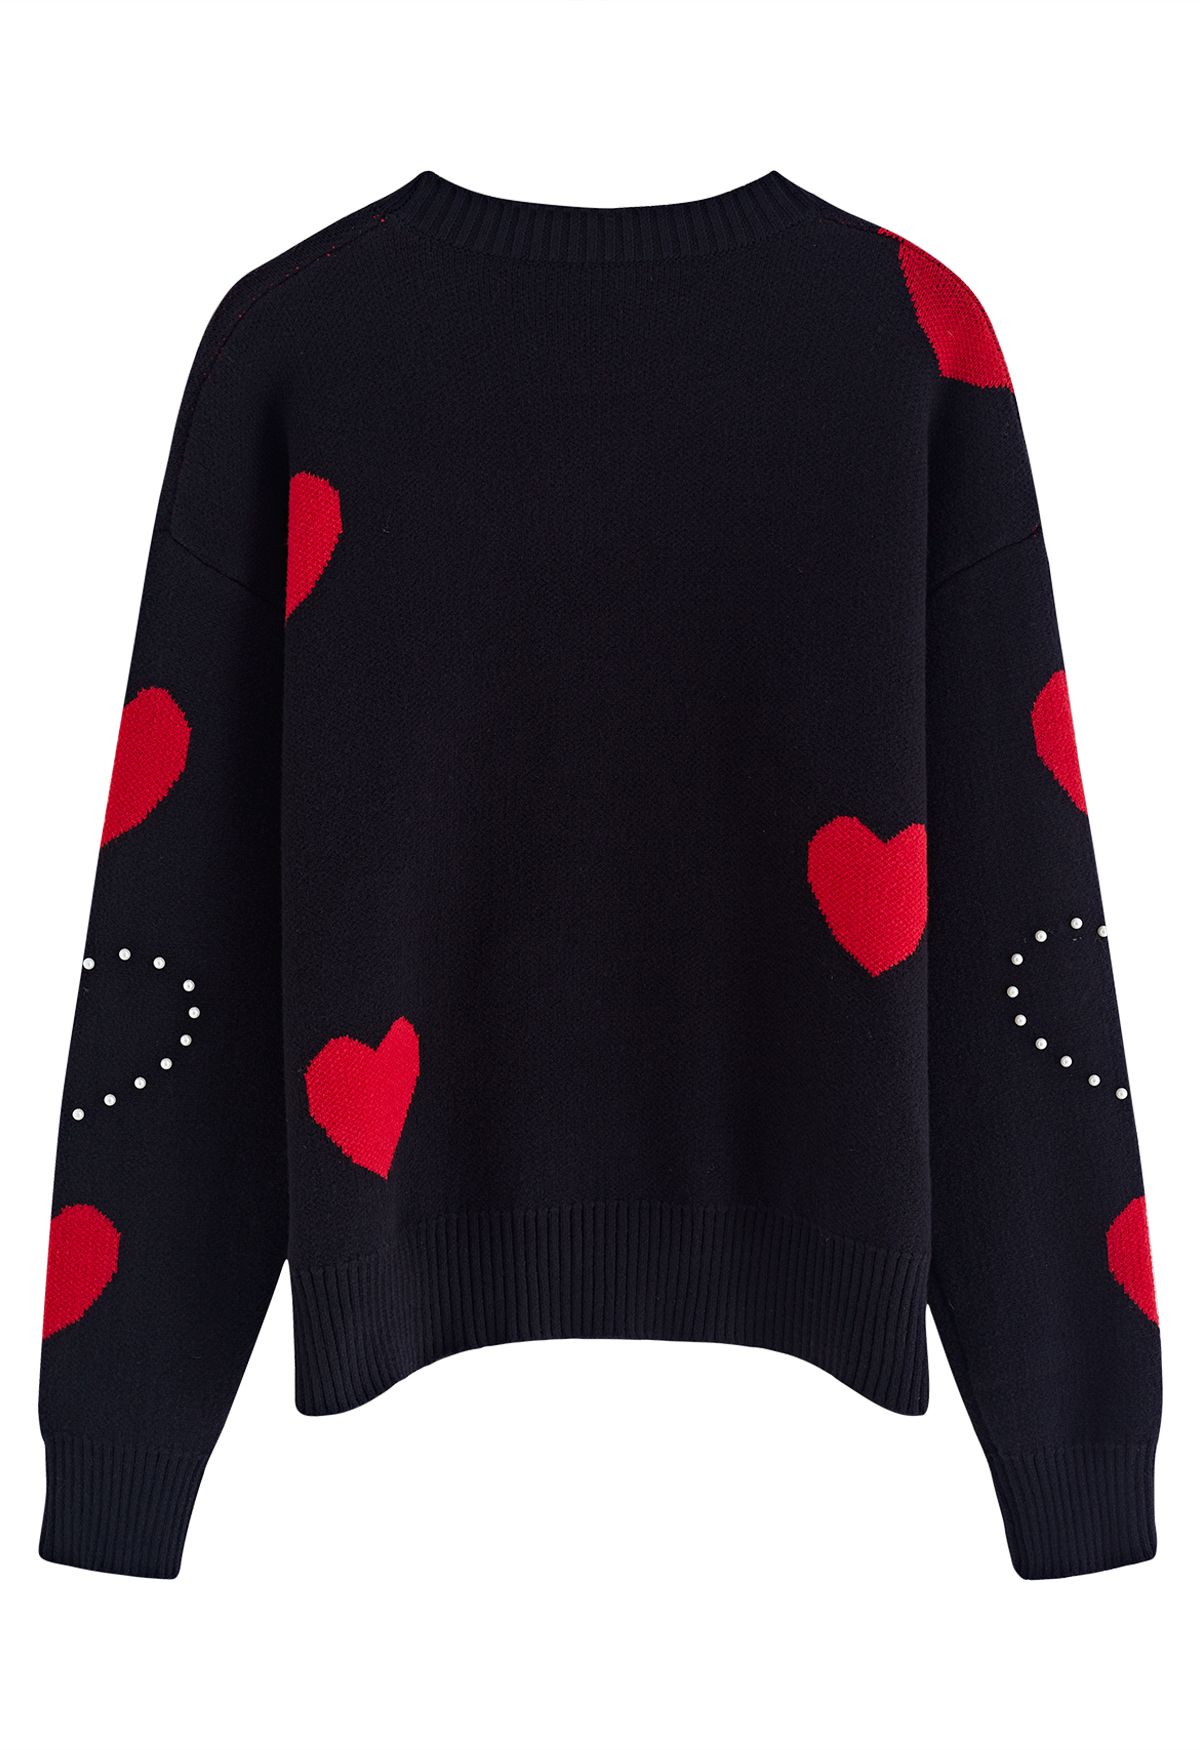 Passionate Heart Pearl Trim Knit Sweater in Black - Retro, Indie and ...